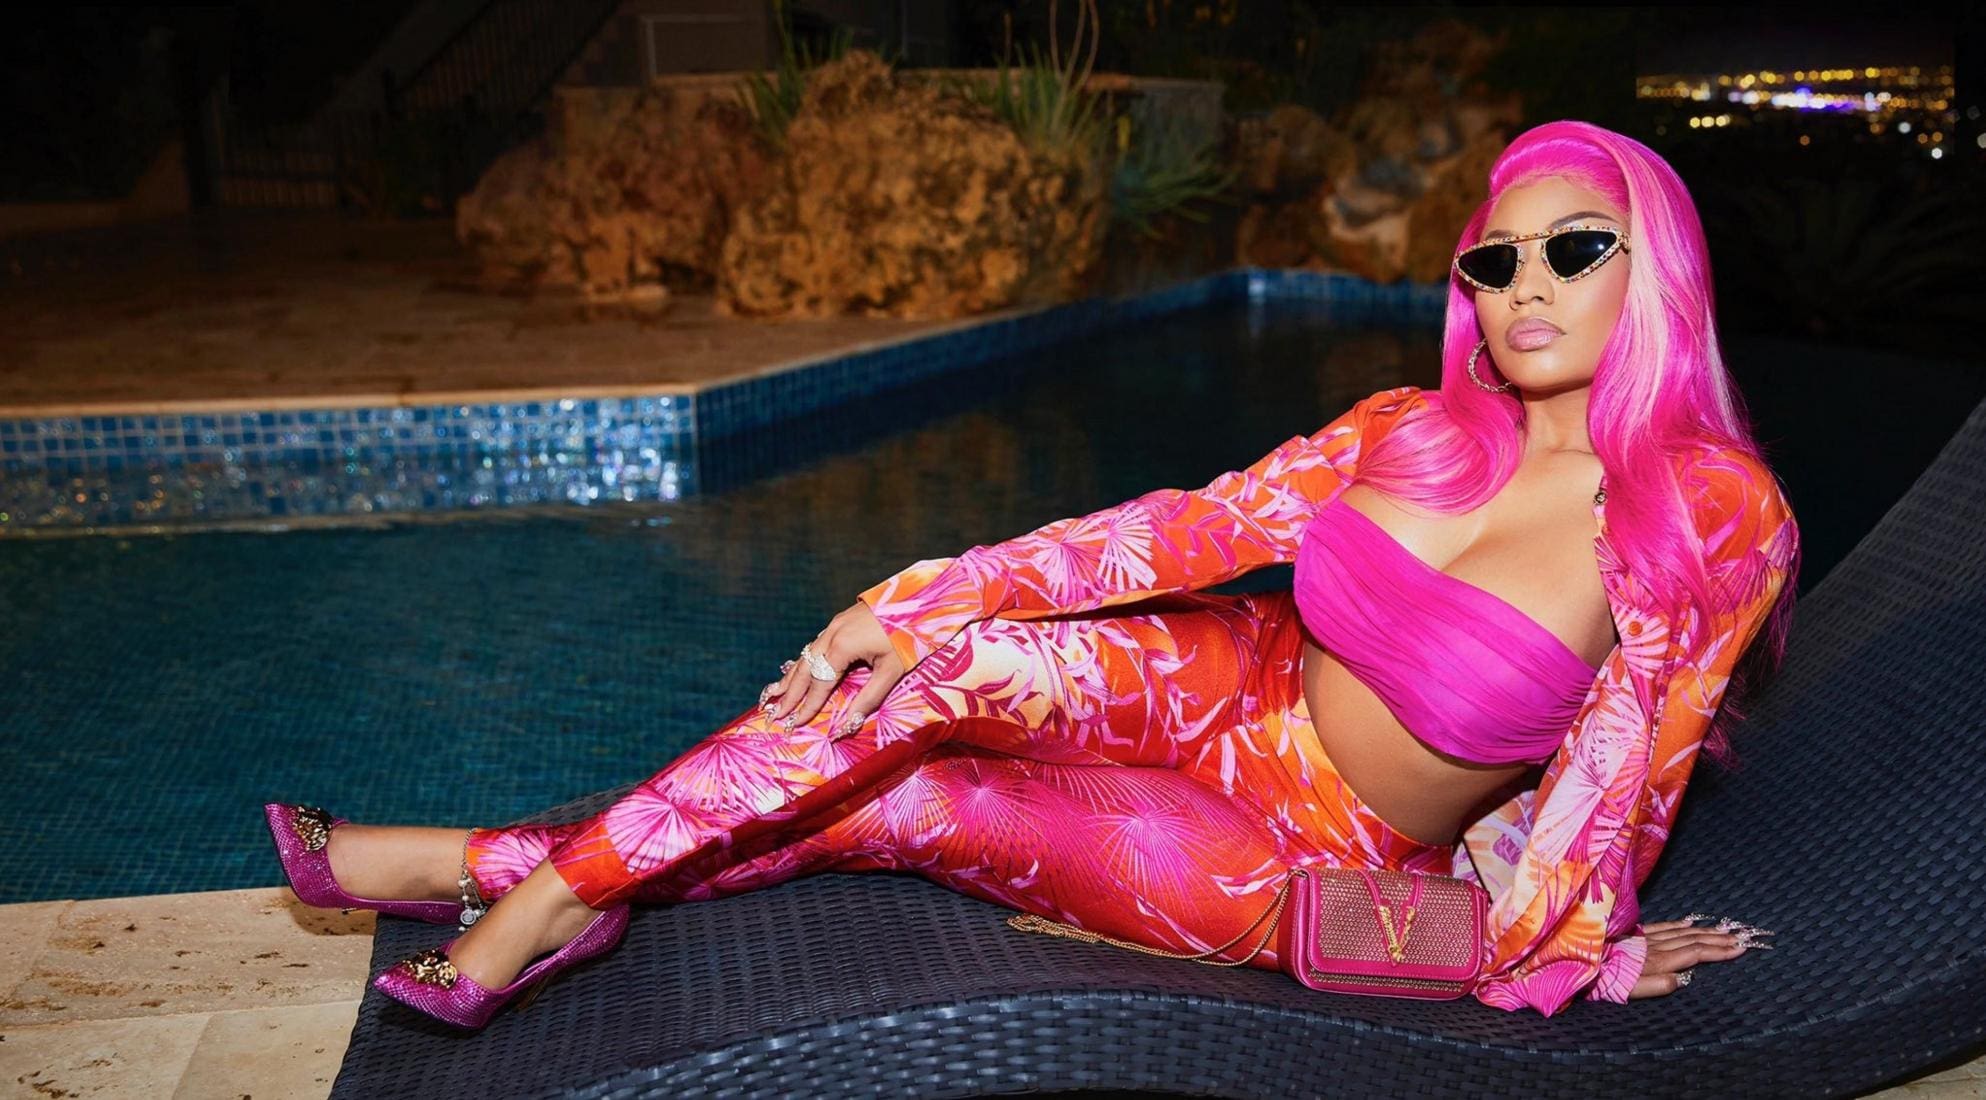 Nicki Minaj Shares The Most Exciting News With Fans - See The Video